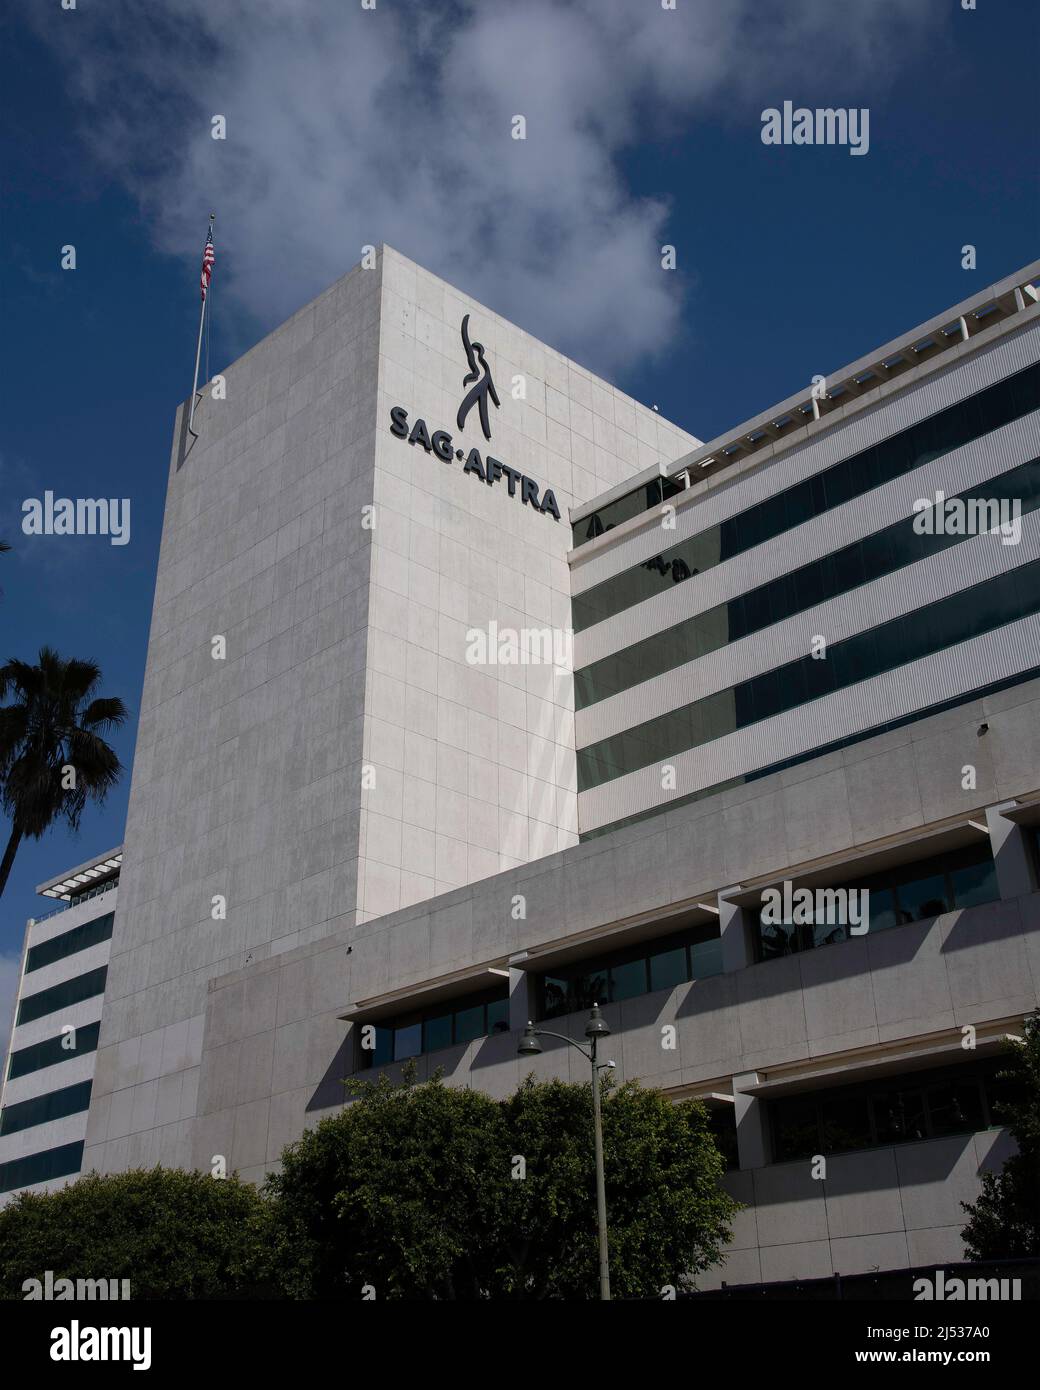 Los Angeles, CA, USA - April 17, 2022: Exterior of the SAG-AFTRA Labor union building on Wilshire boulevard in Los Angeles, CA. Stock Photo